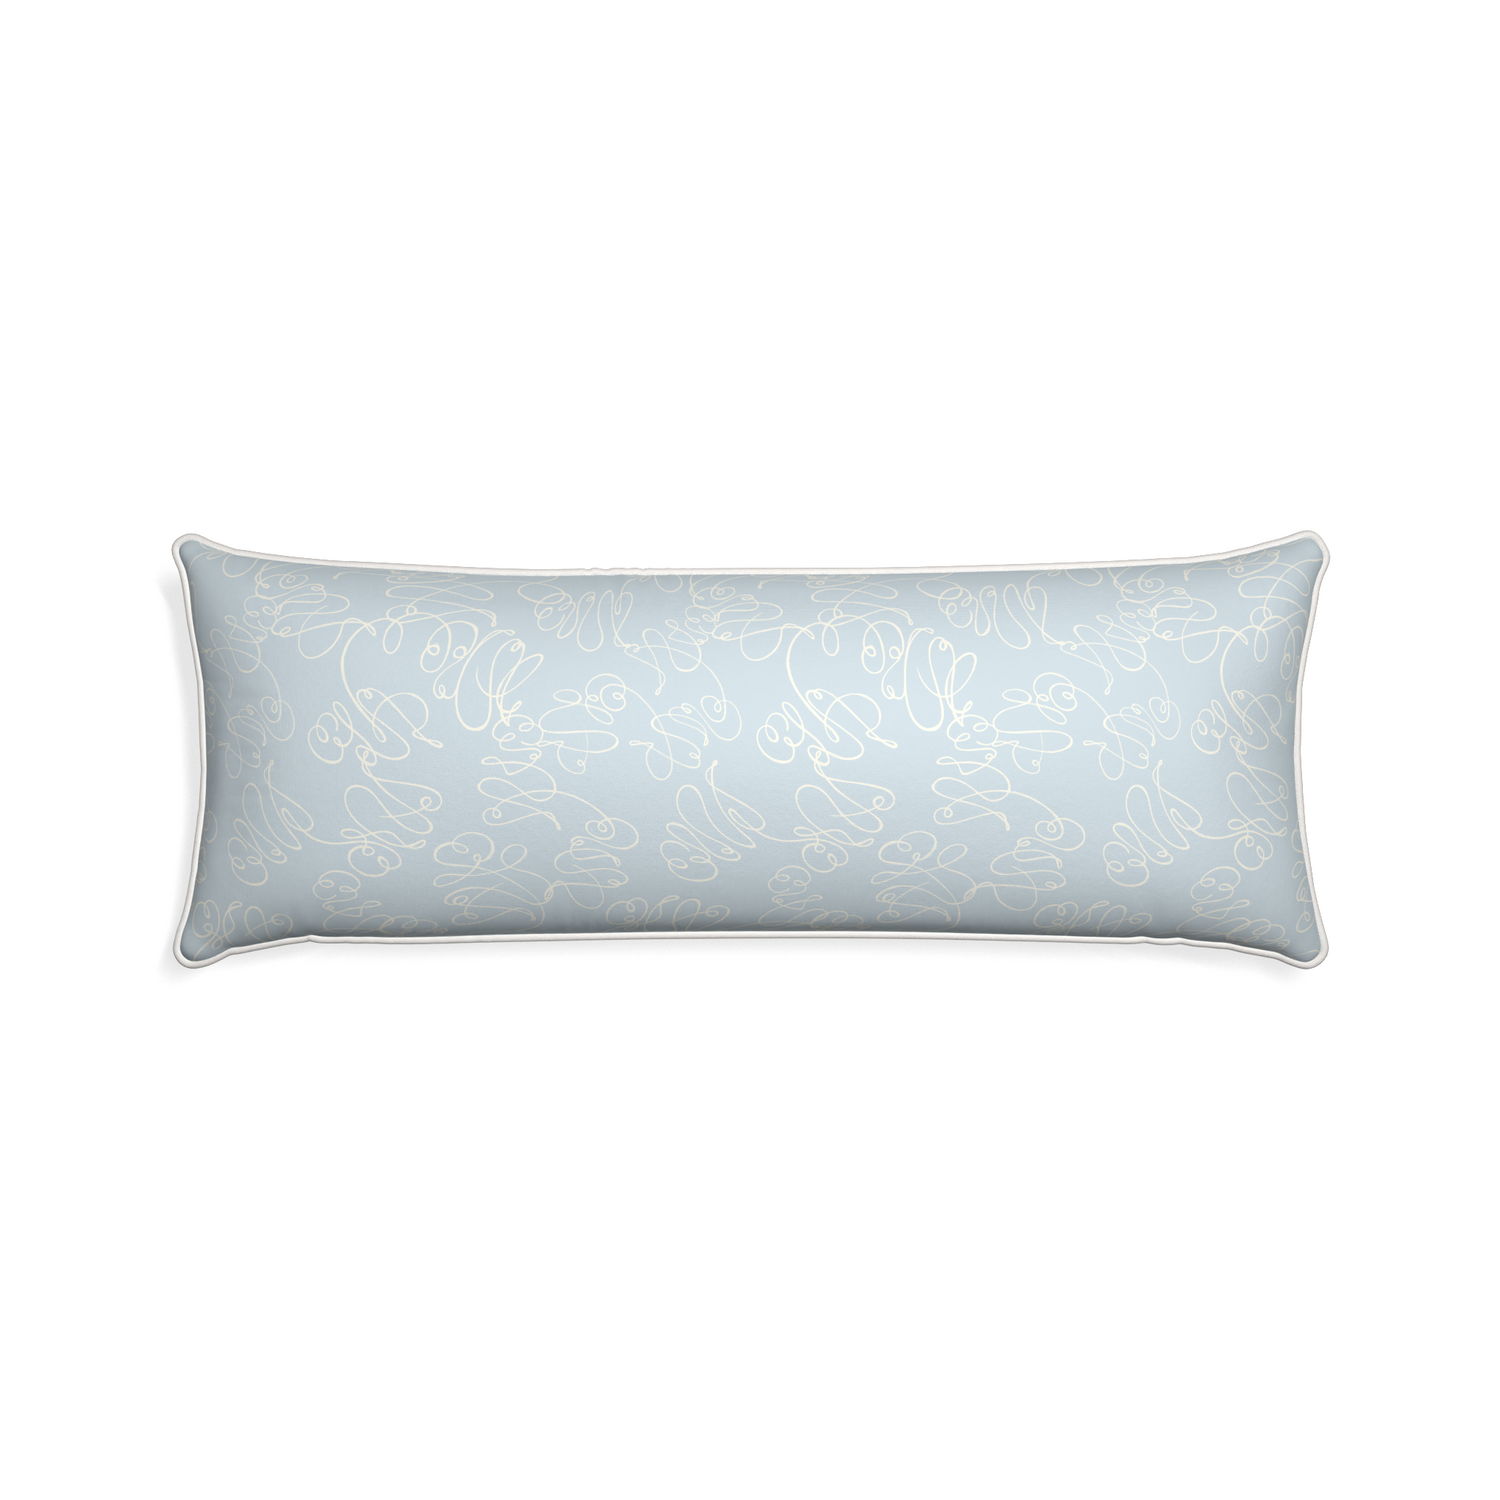 Xl-lumbar mirabella custom powder blue abstractpillow with snow piping on white background